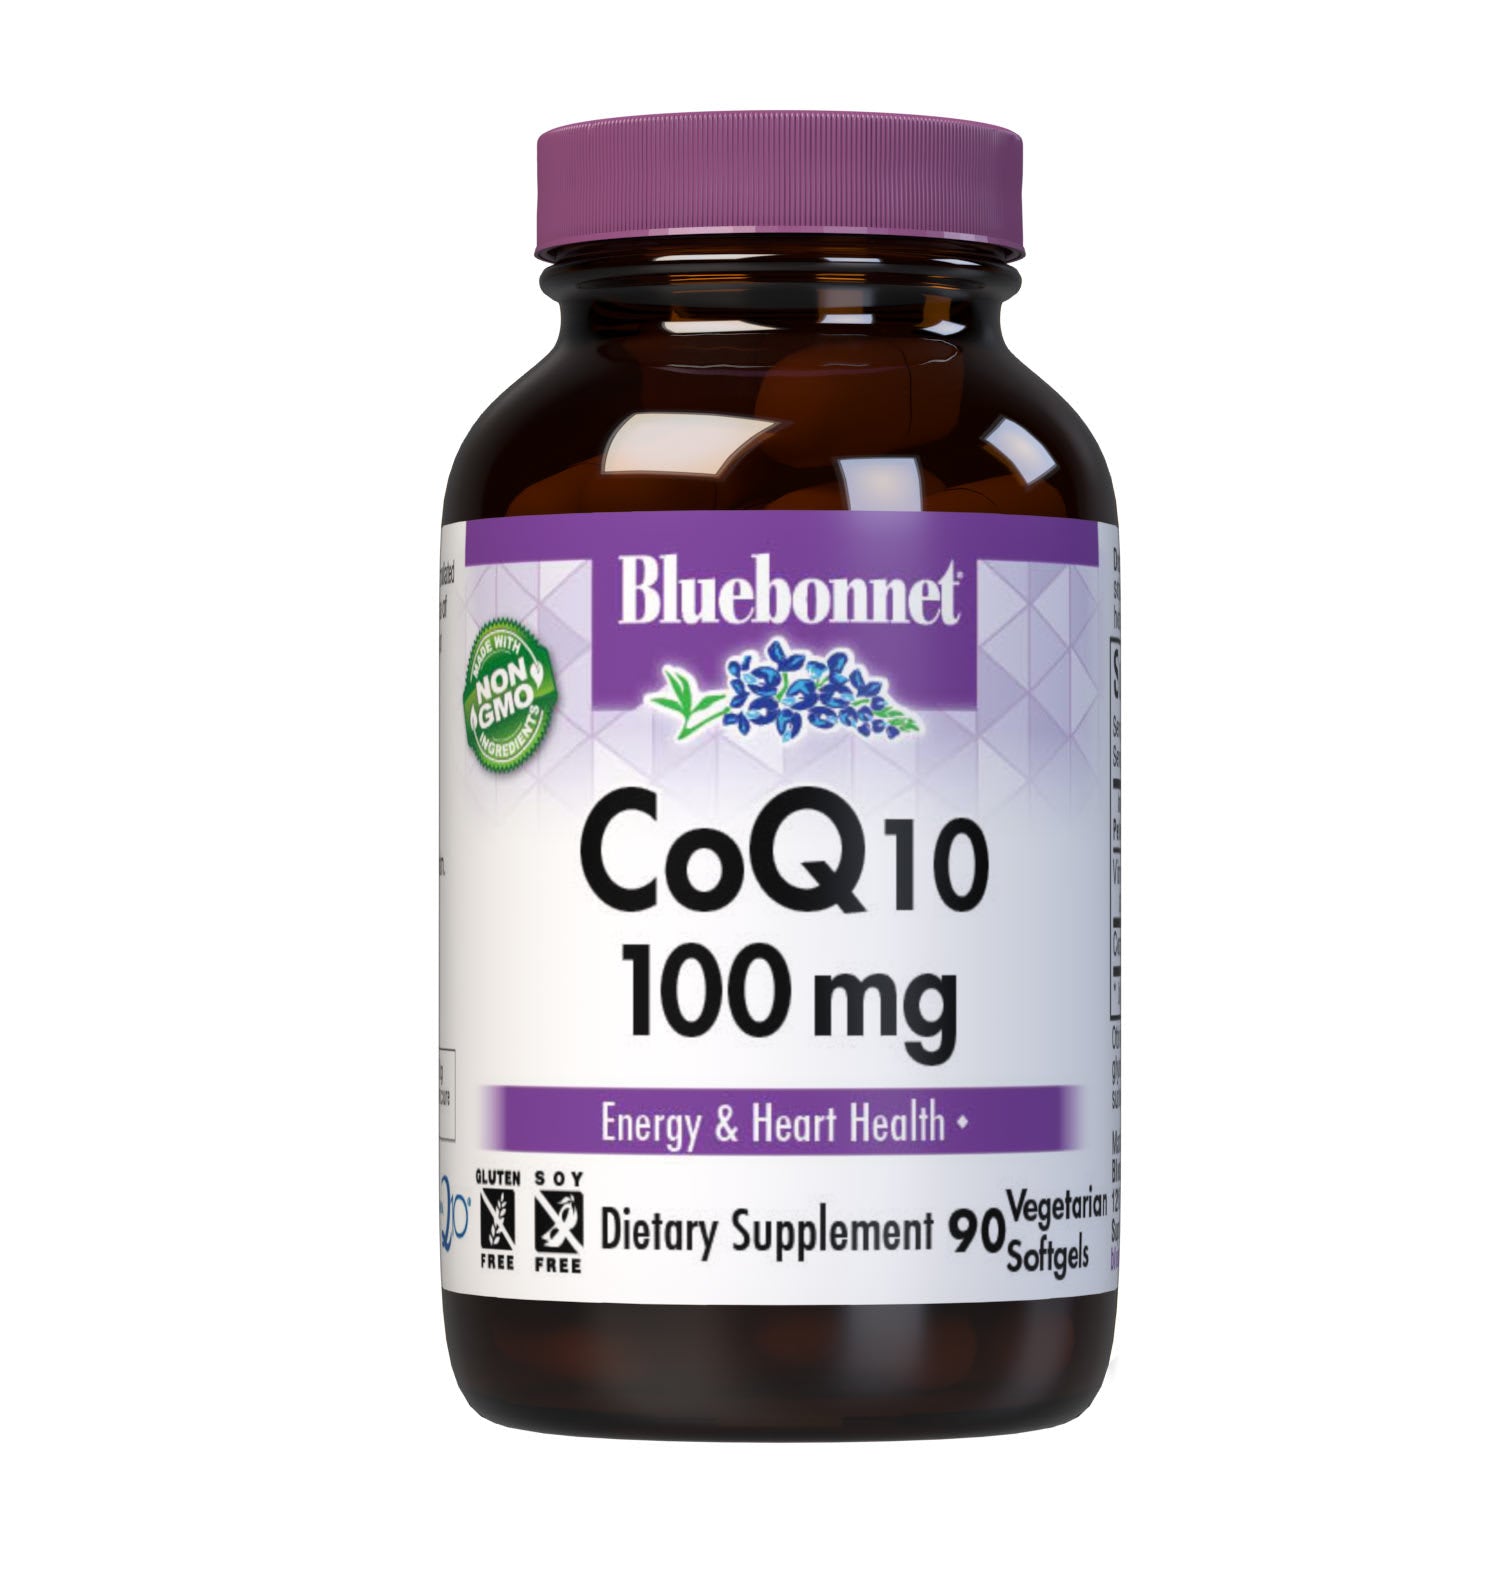 Bluebonnet’s CoQ10 30 mg 90 Vegetarian Softgels are formulated with the trans-isomer form of CoQ10 (ubiquinone) in a base of non-GMO sunflower oil along with vitamin E to support energy levels and cardiovascular health. #size_90 count